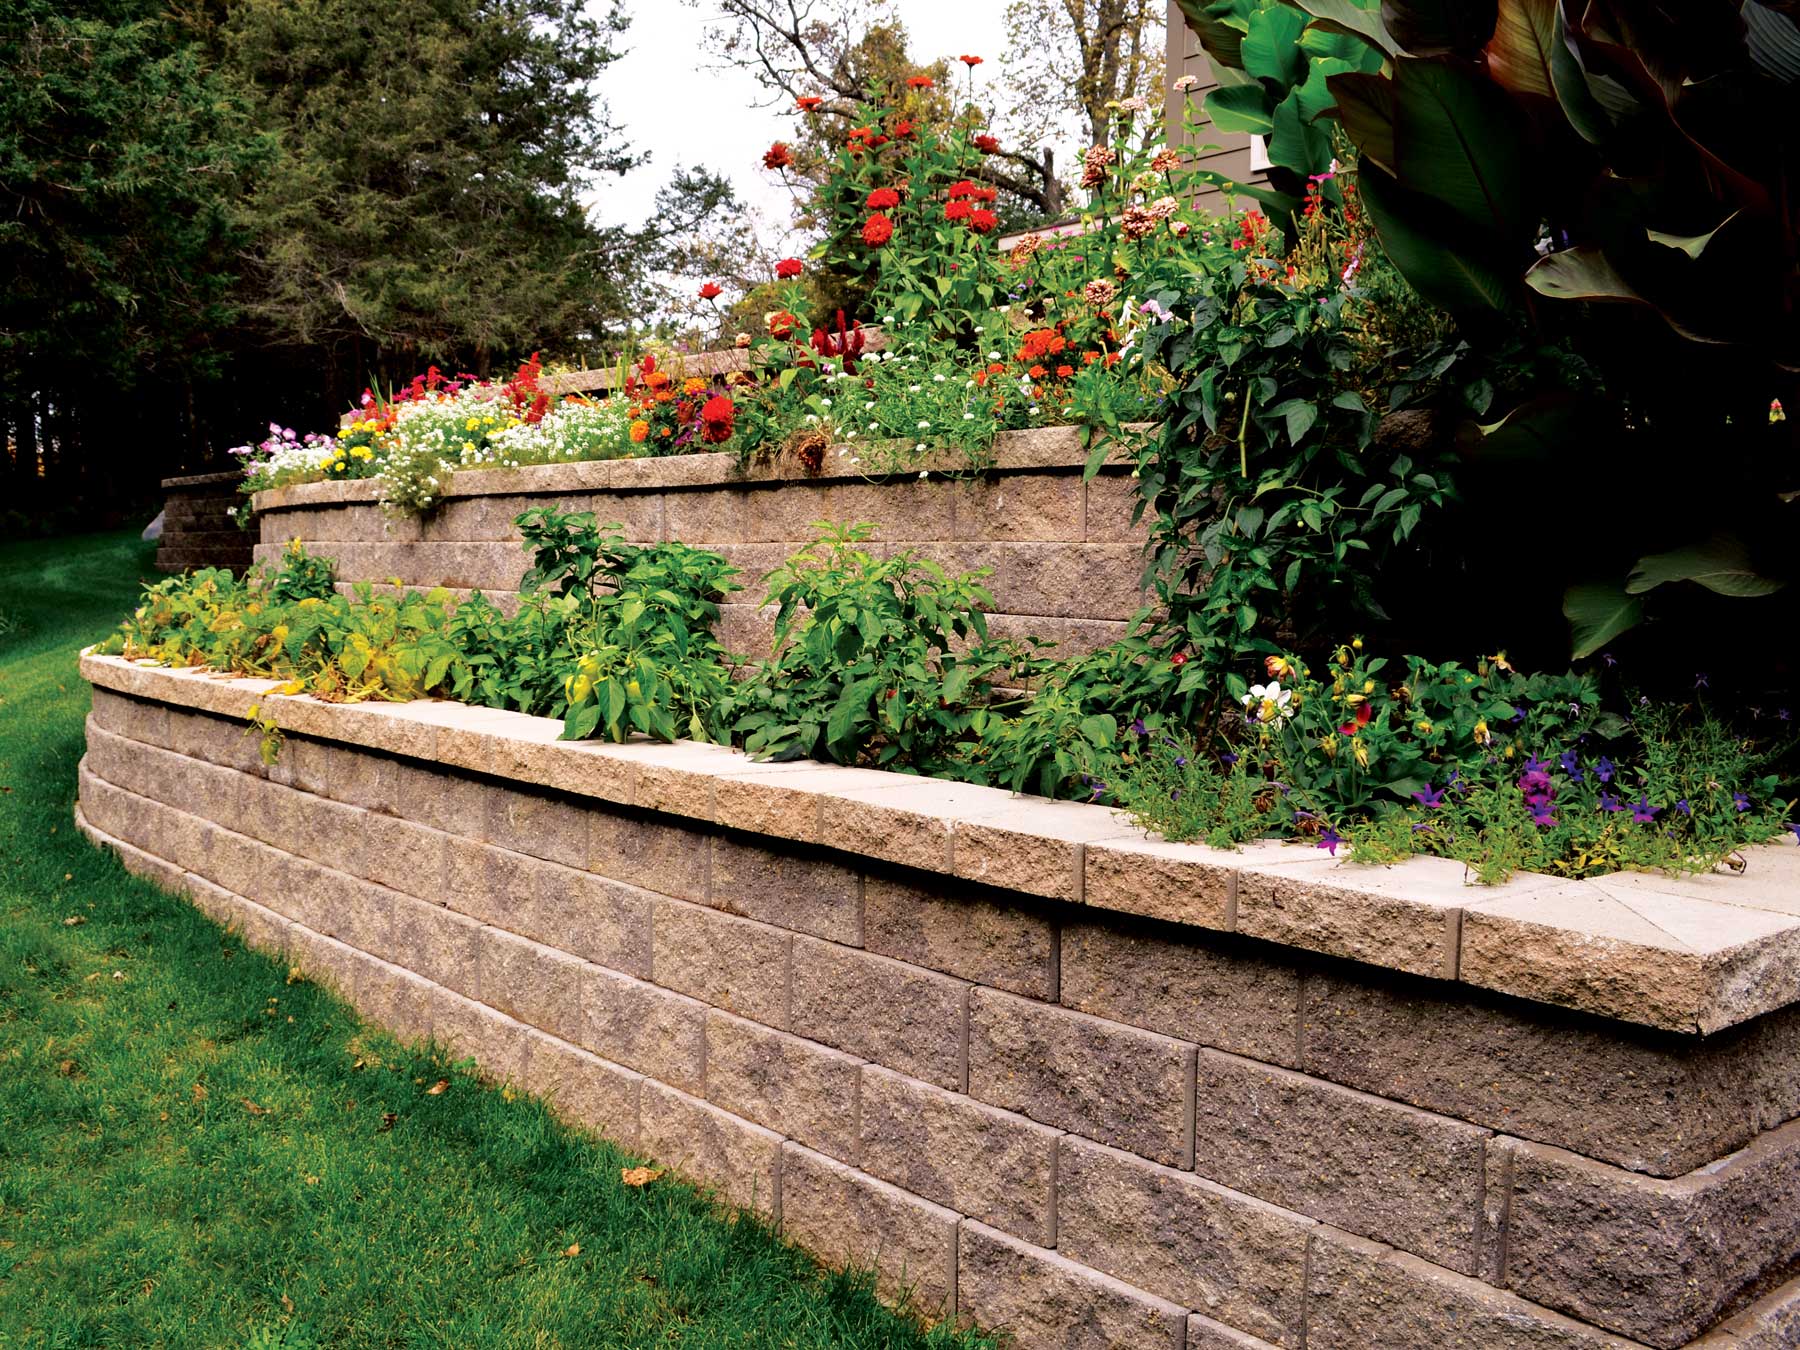 Retaining Walls – Welcome to LondonStone, LondonPaver and LondonBoulder